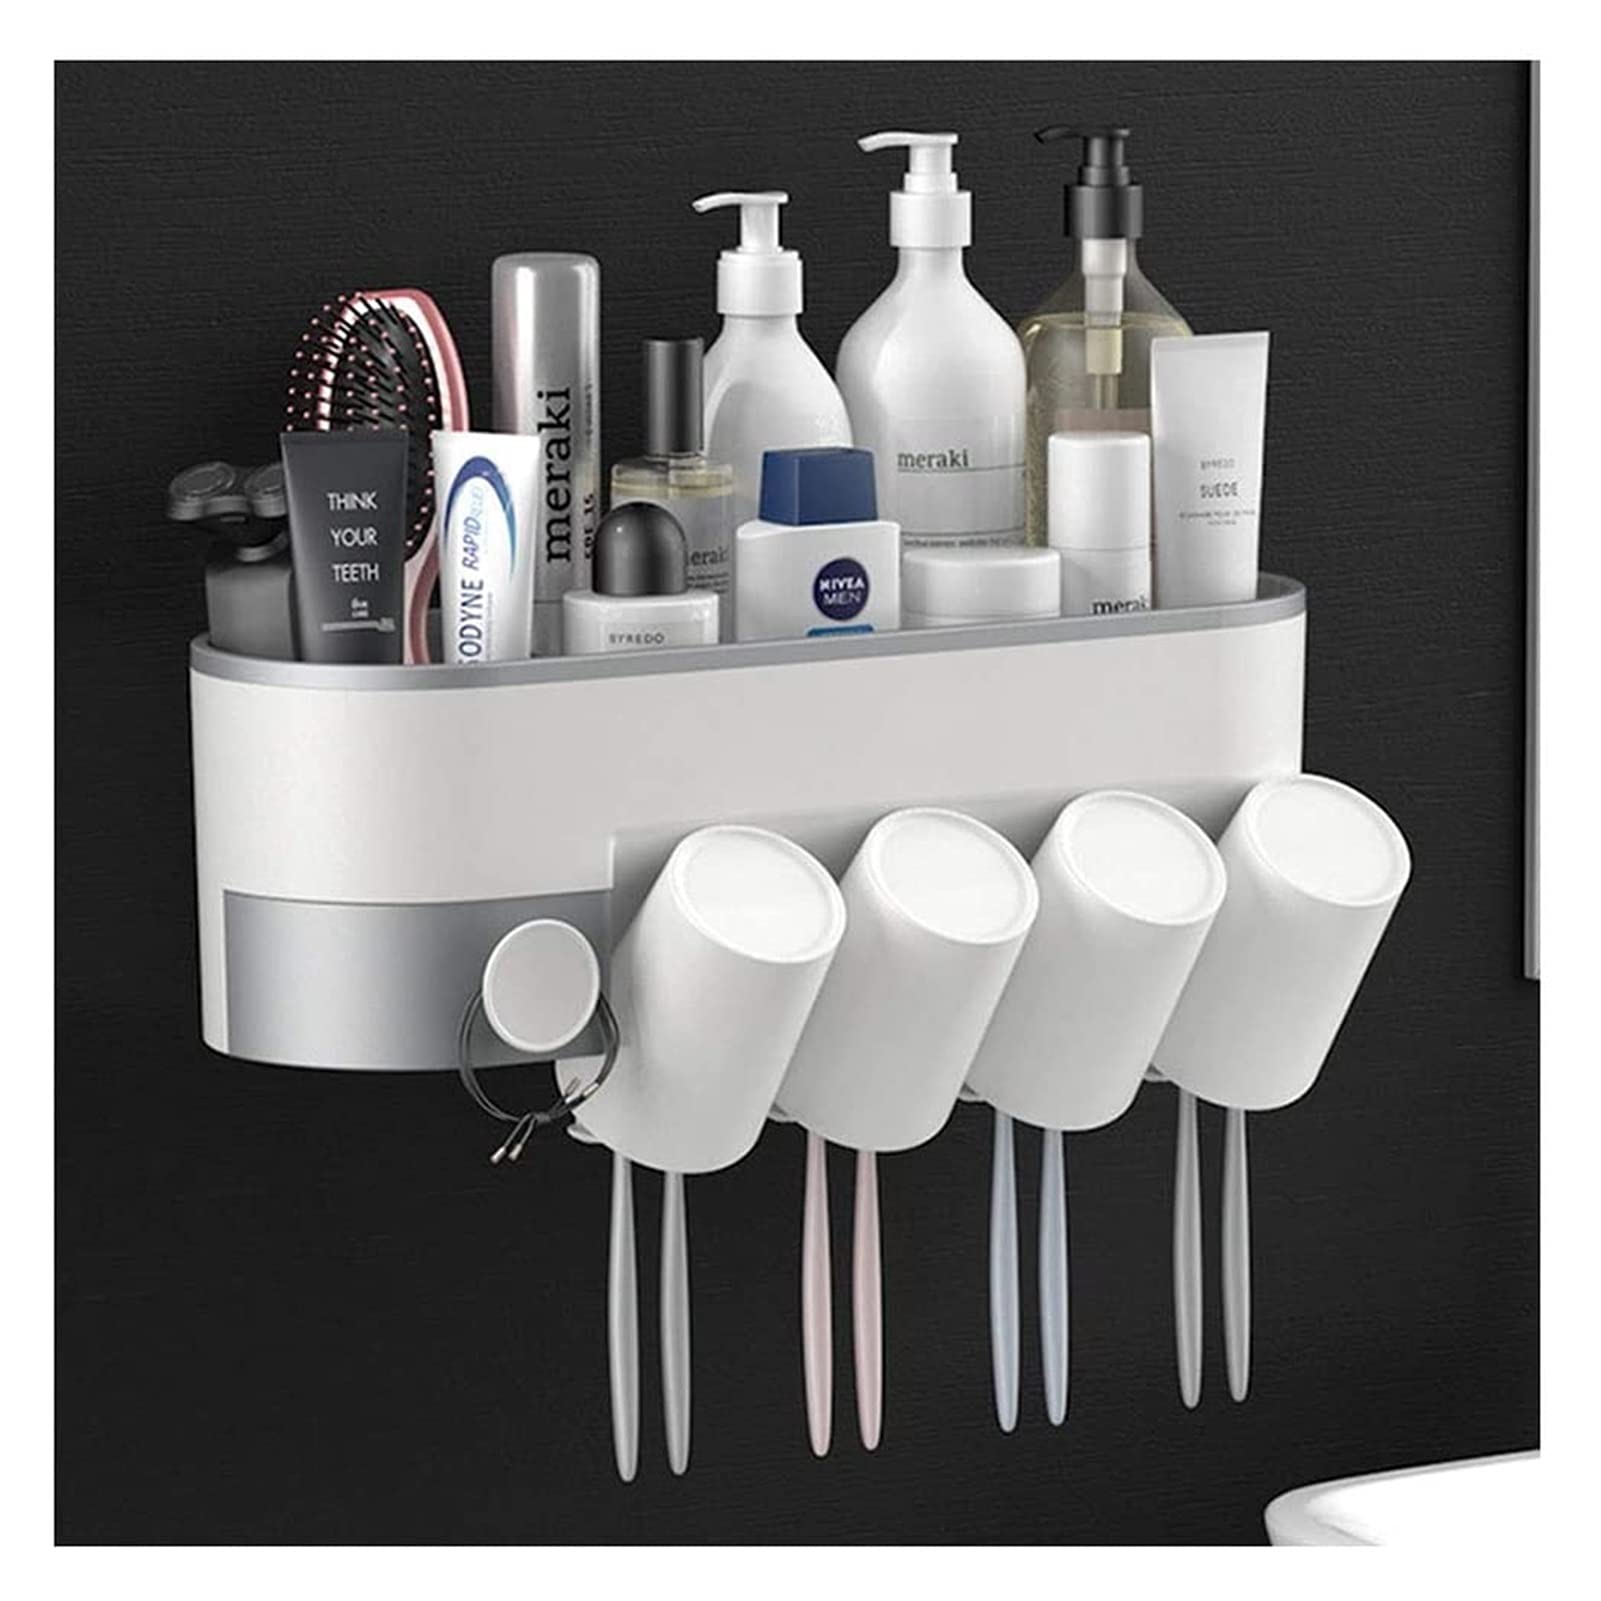 Automatic Toothpaste Dispenser, Squeezer and Toothbrush Holder ABS Wall Mounted Space Saving Toothbrush Organizer Magnetic Cups Organizer (Color : ...